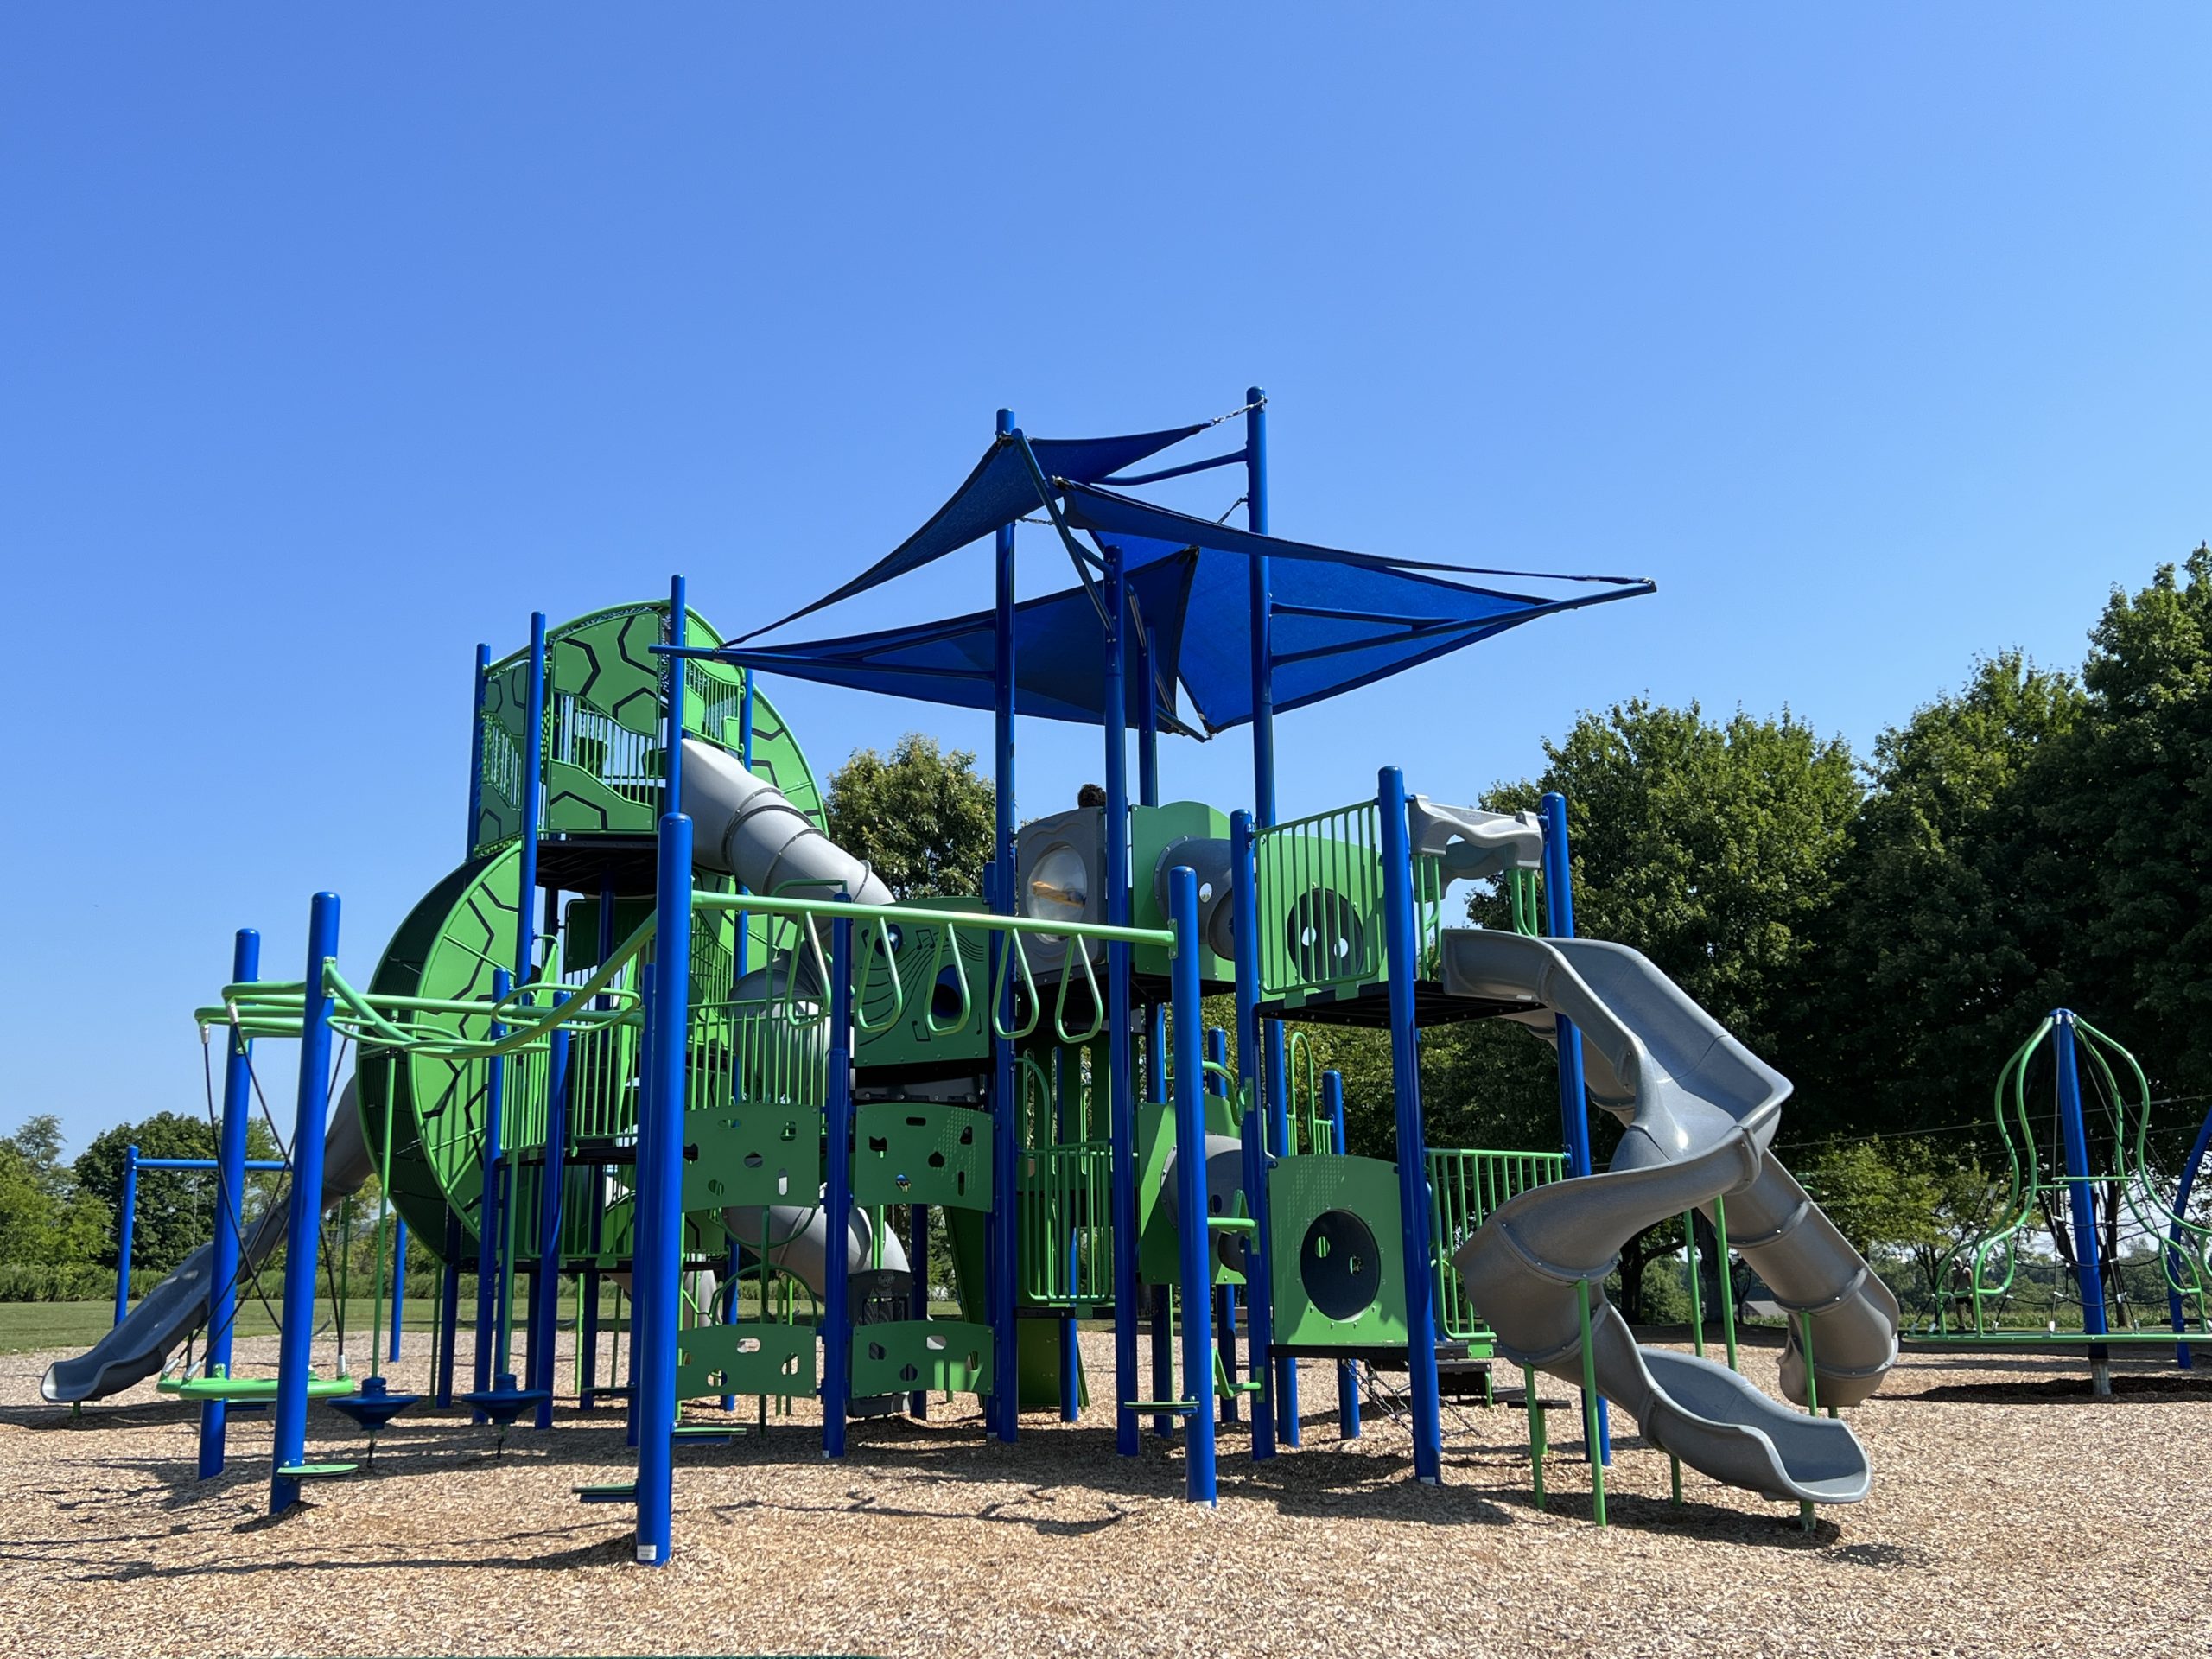 WIDE - Playground Structure with 1 spinner parking lot side At Heritage Park Playground in Asbury NJ